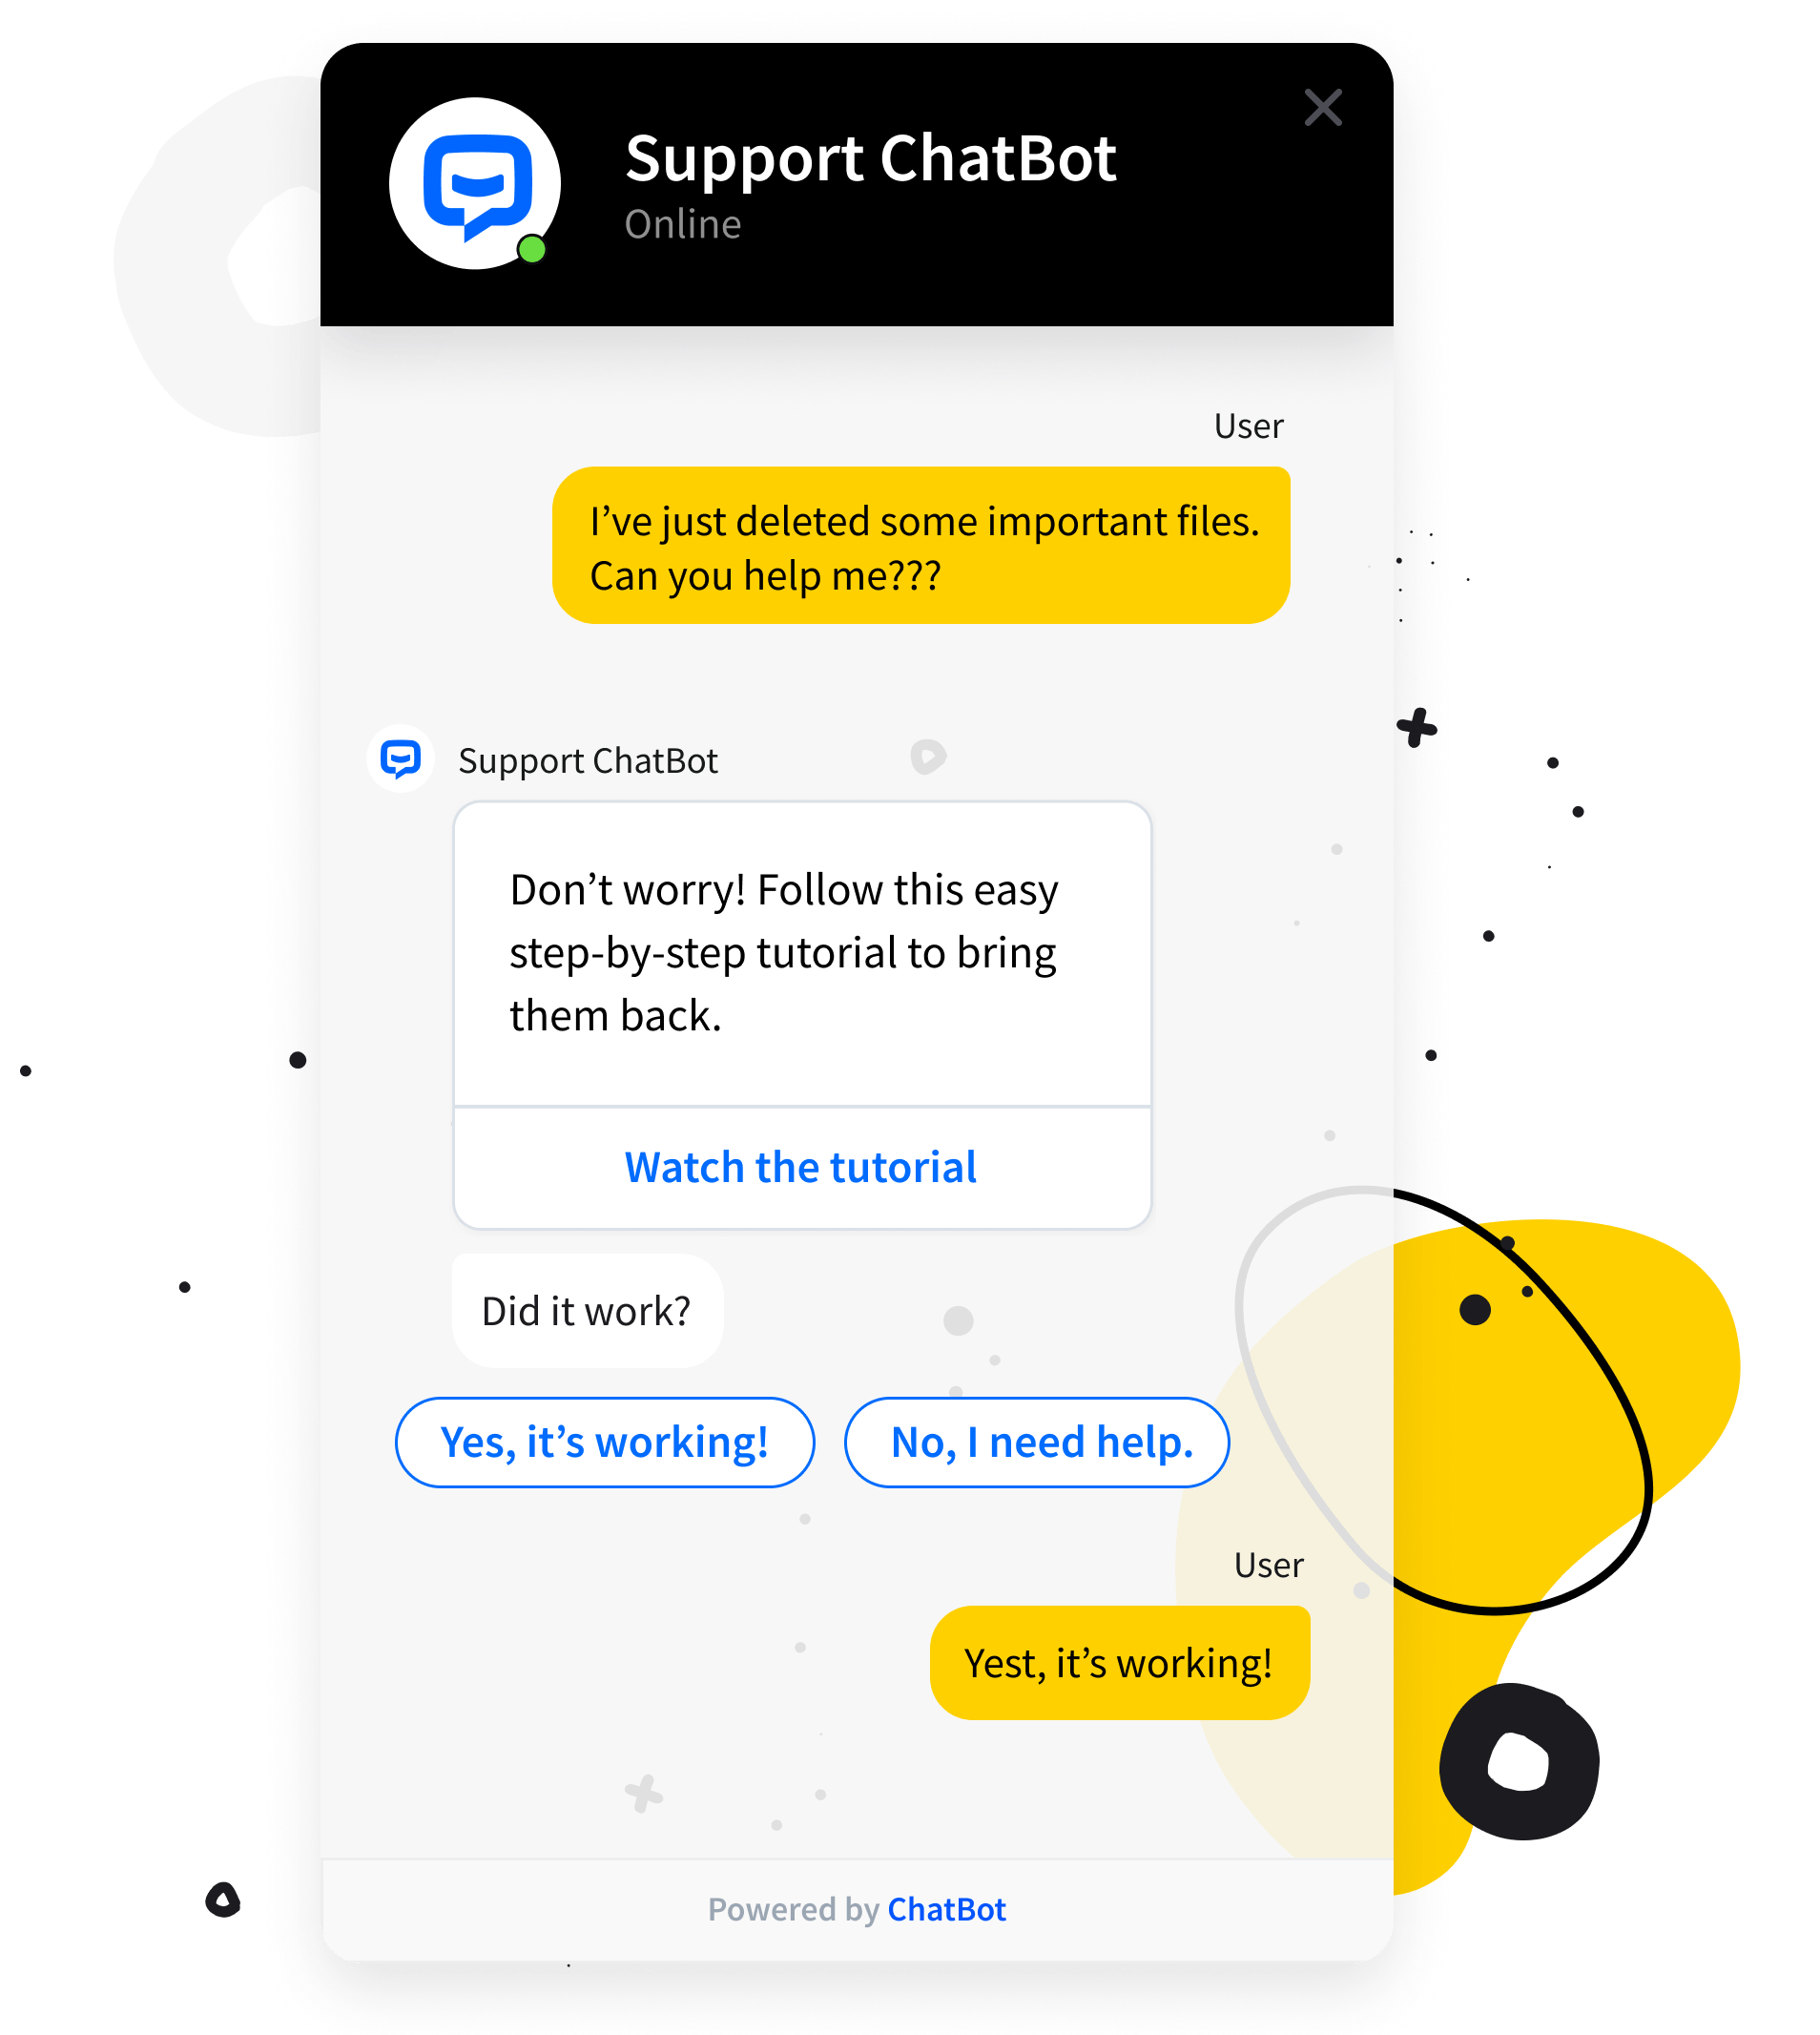 A support ChatBot image from Chatbot.com.